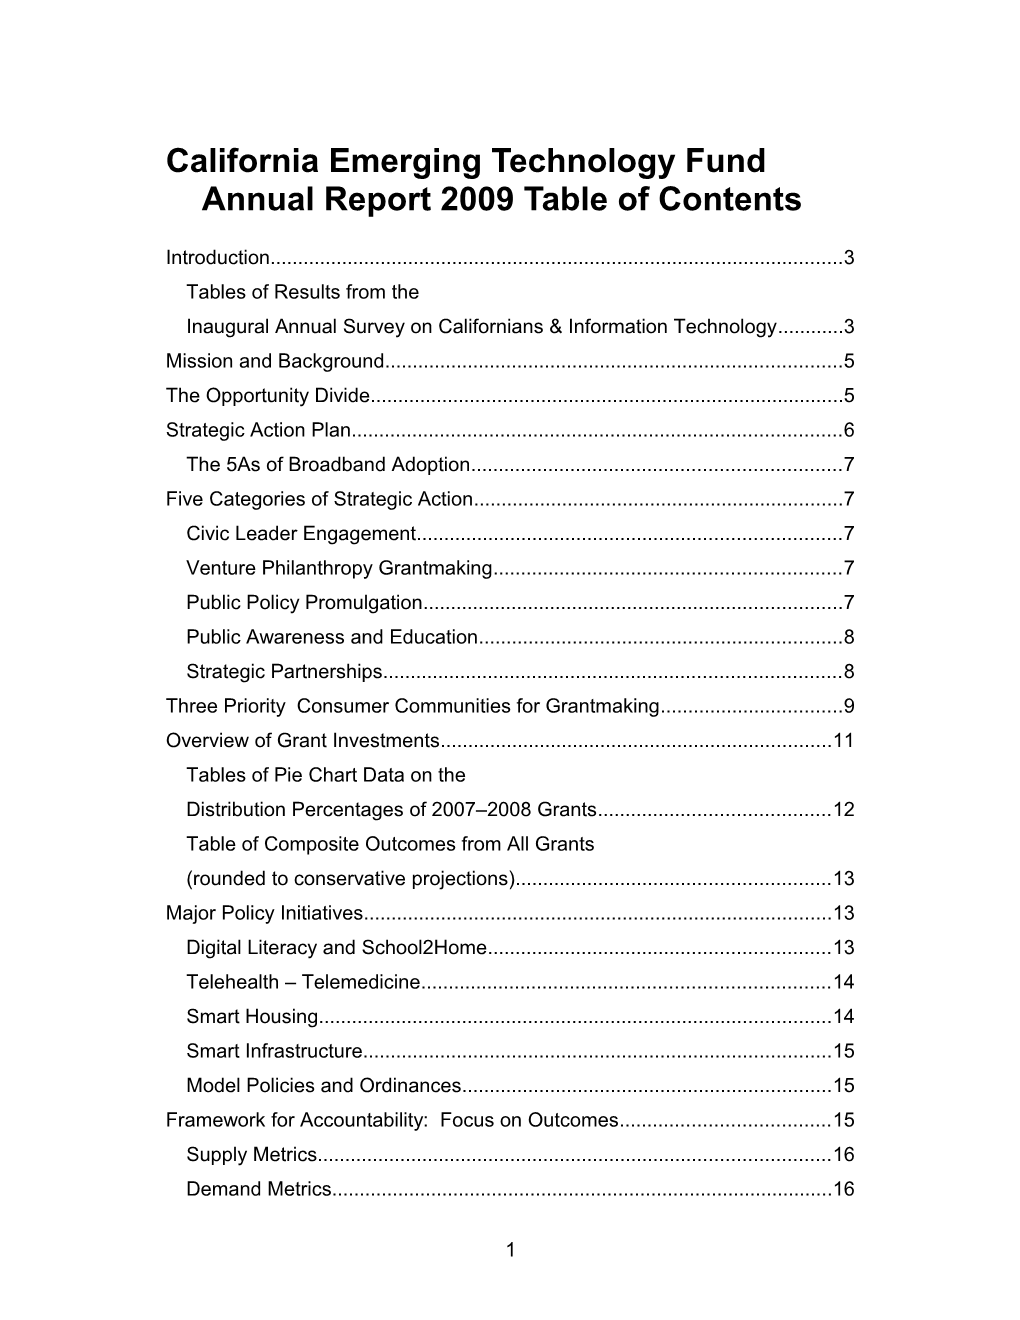 California Emerging Technology Fund Annual Report 2009 Table of Contents